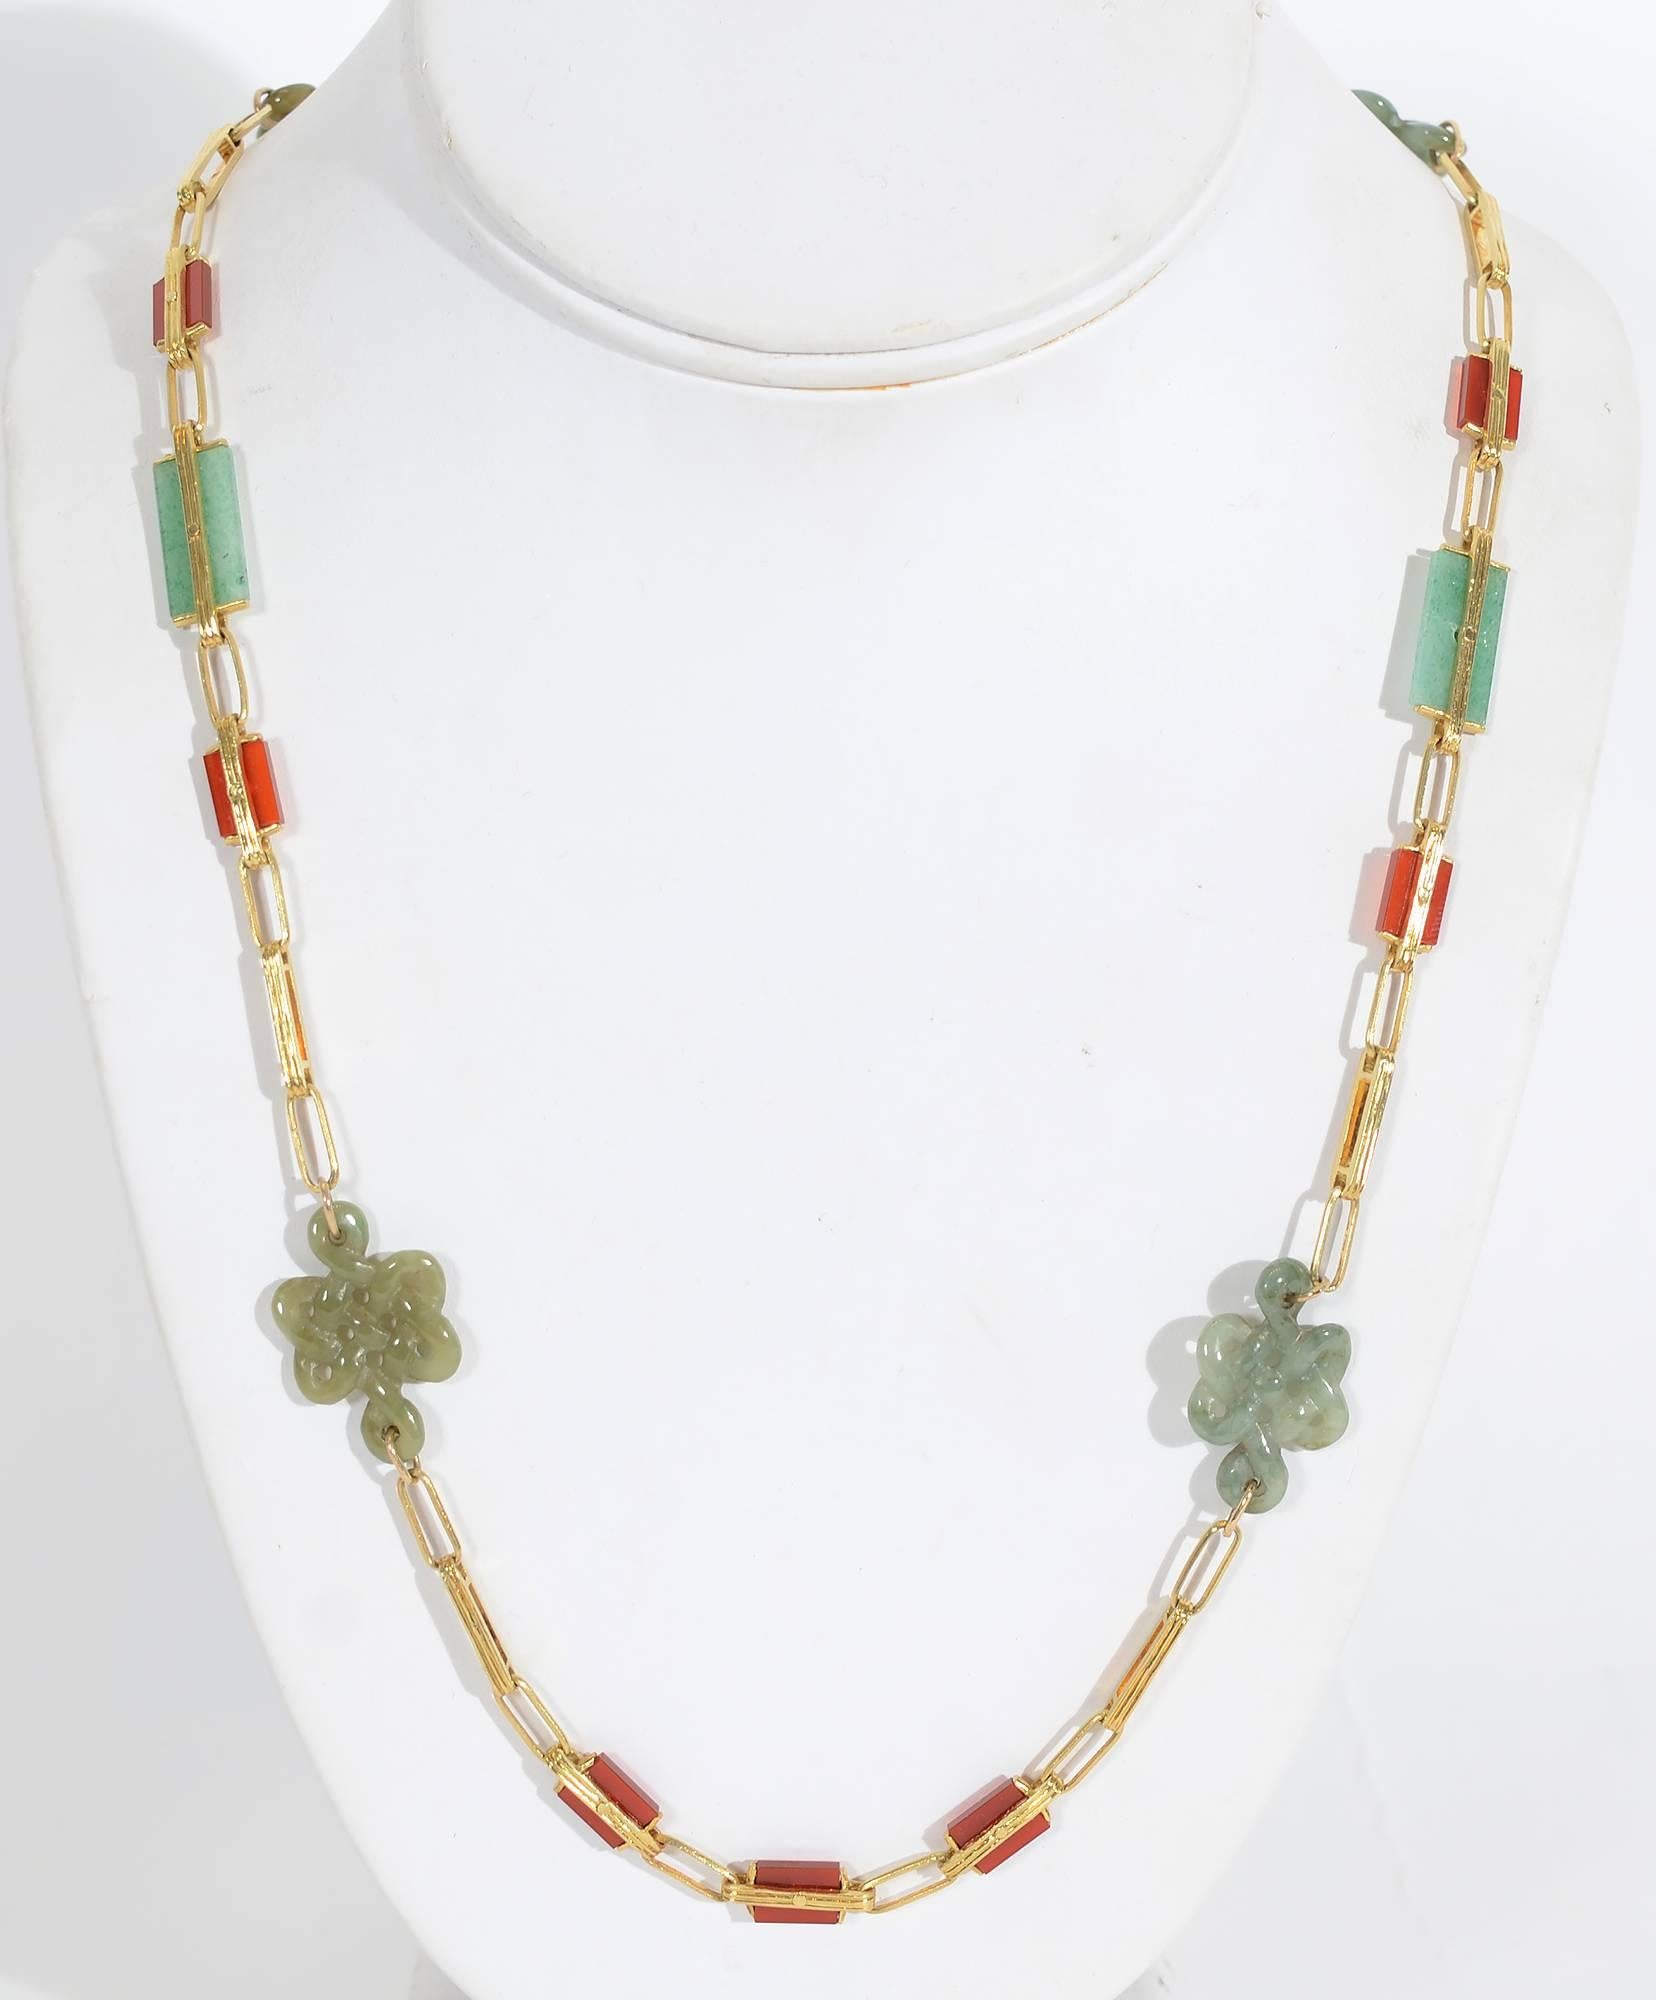 Unusual gold with carnelian and jade necklace. The elongated gold links alternate with rectangles of the two stones. Four lacy carved medallions of jade are a wonderful contrast to the geometric shapes. The necklace measures 33 inches in length. The